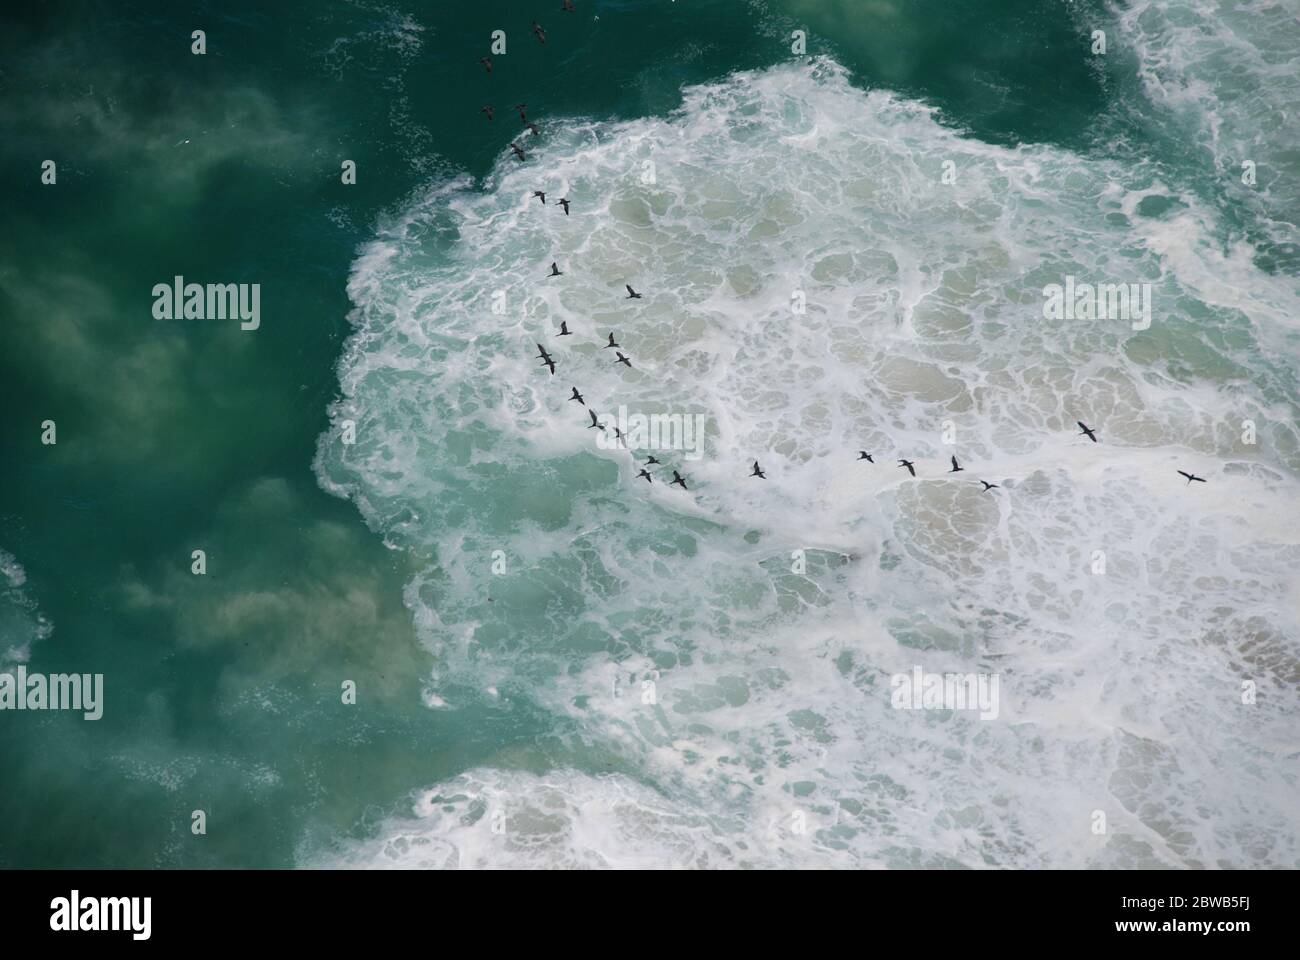 Wild coast line with cliffs and crashing waves shot from above with a flock of birds flying overhead. Birdseye/aerial view. Shot in South Africa. Stock Photo